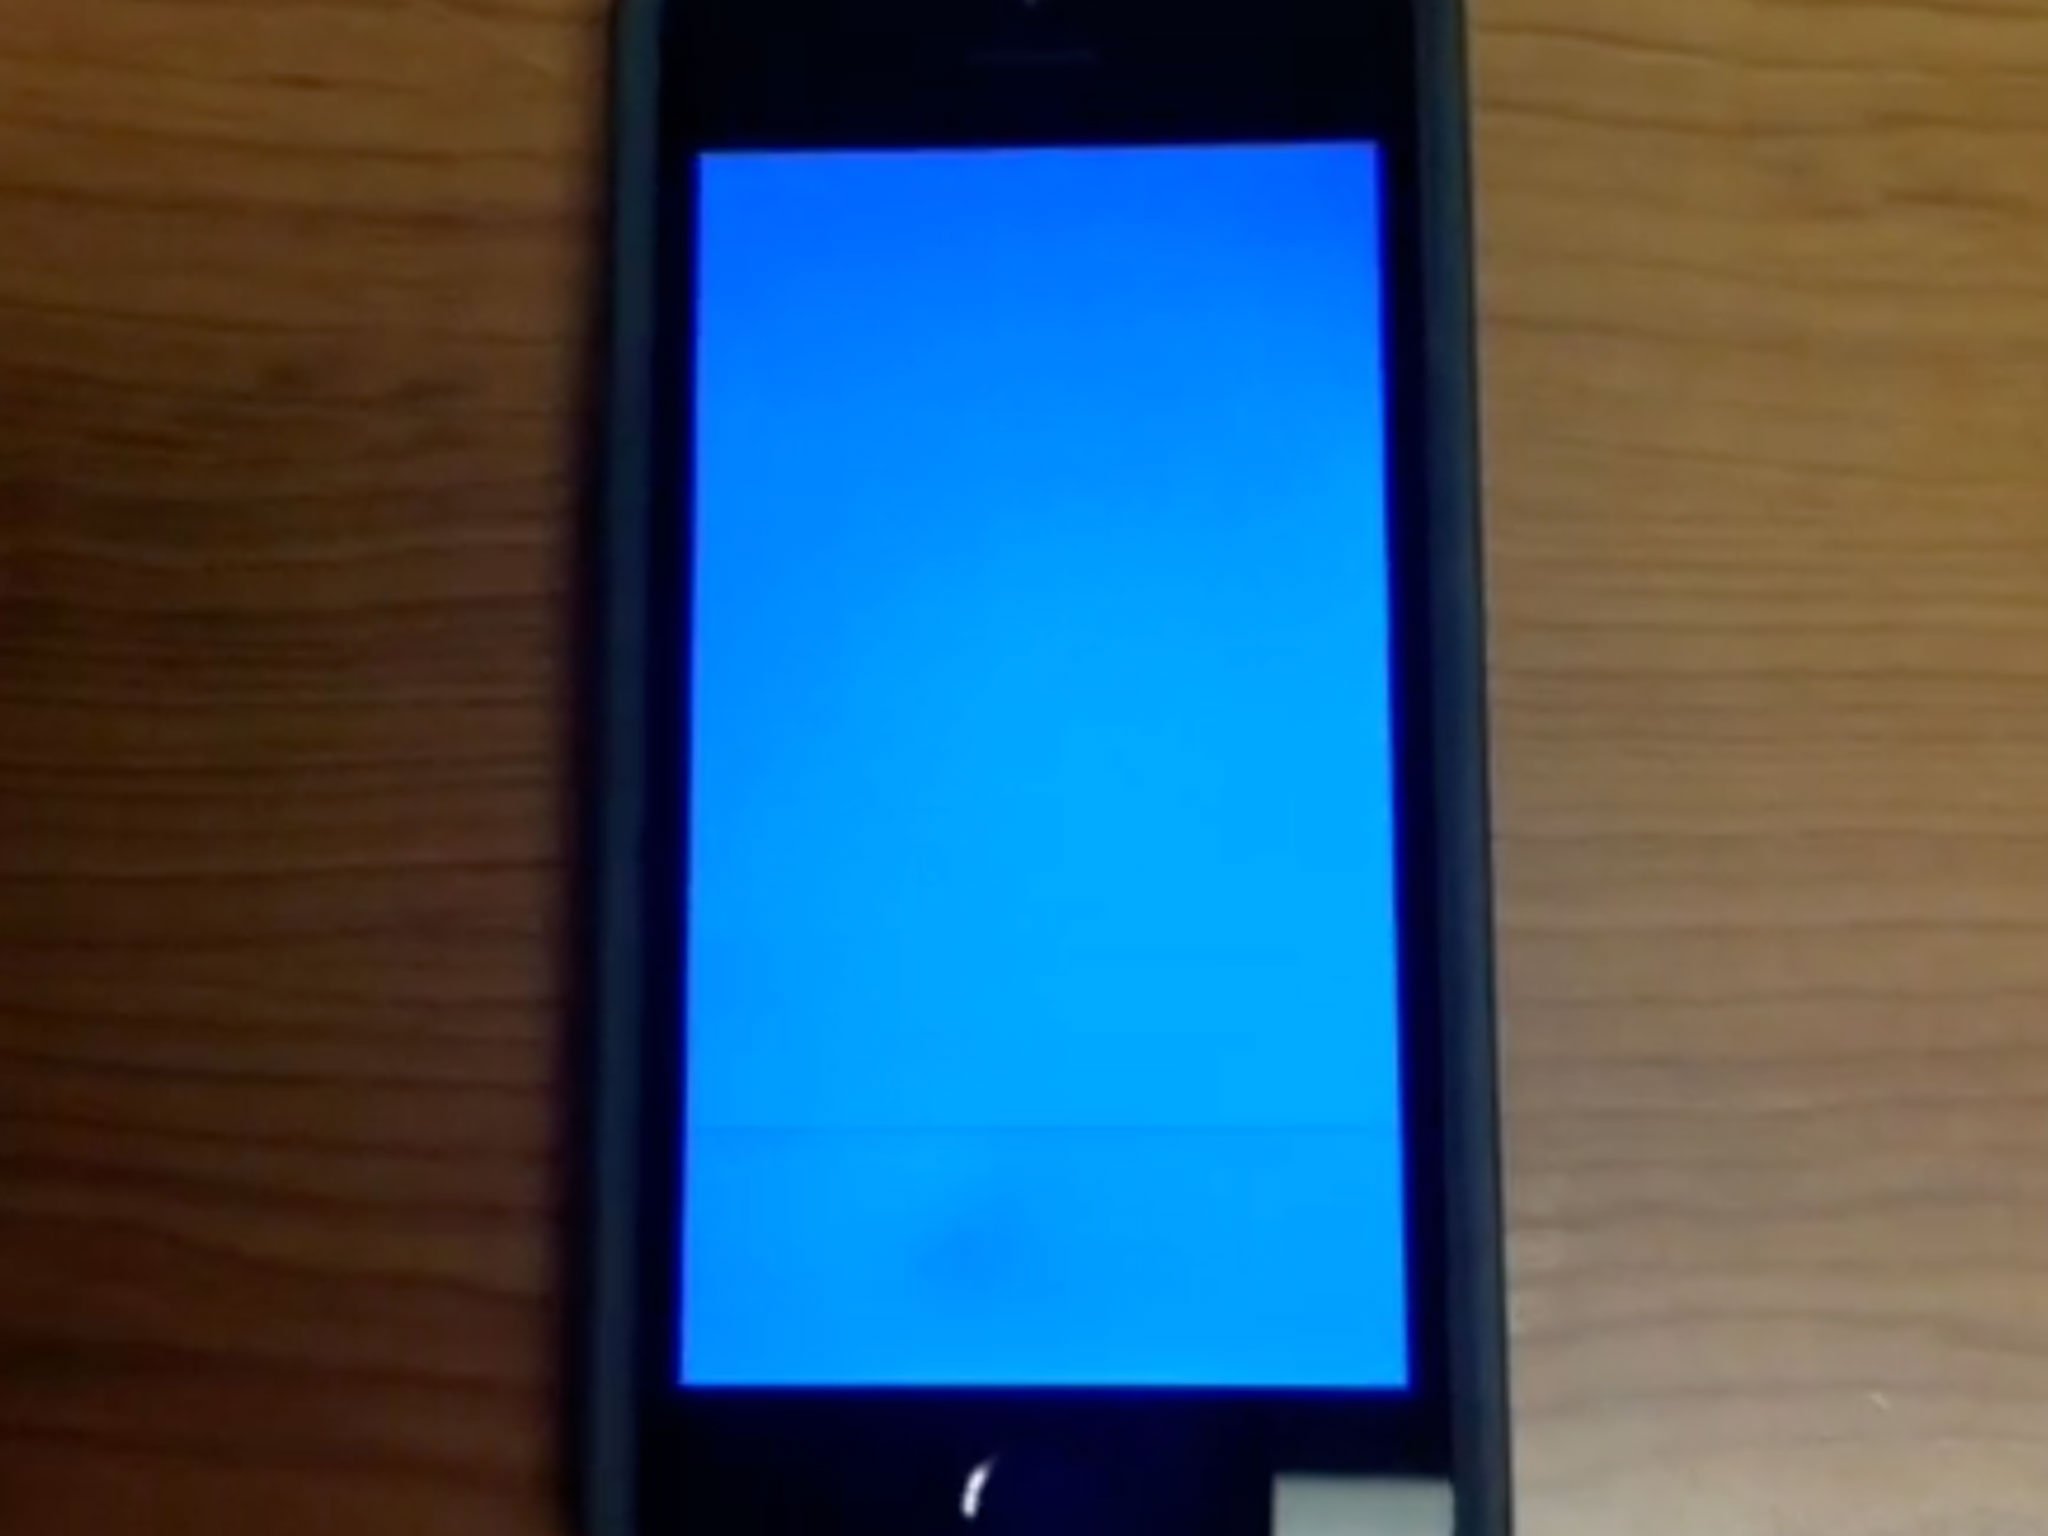 iOS 7 blue screen of death caught on video in the wild